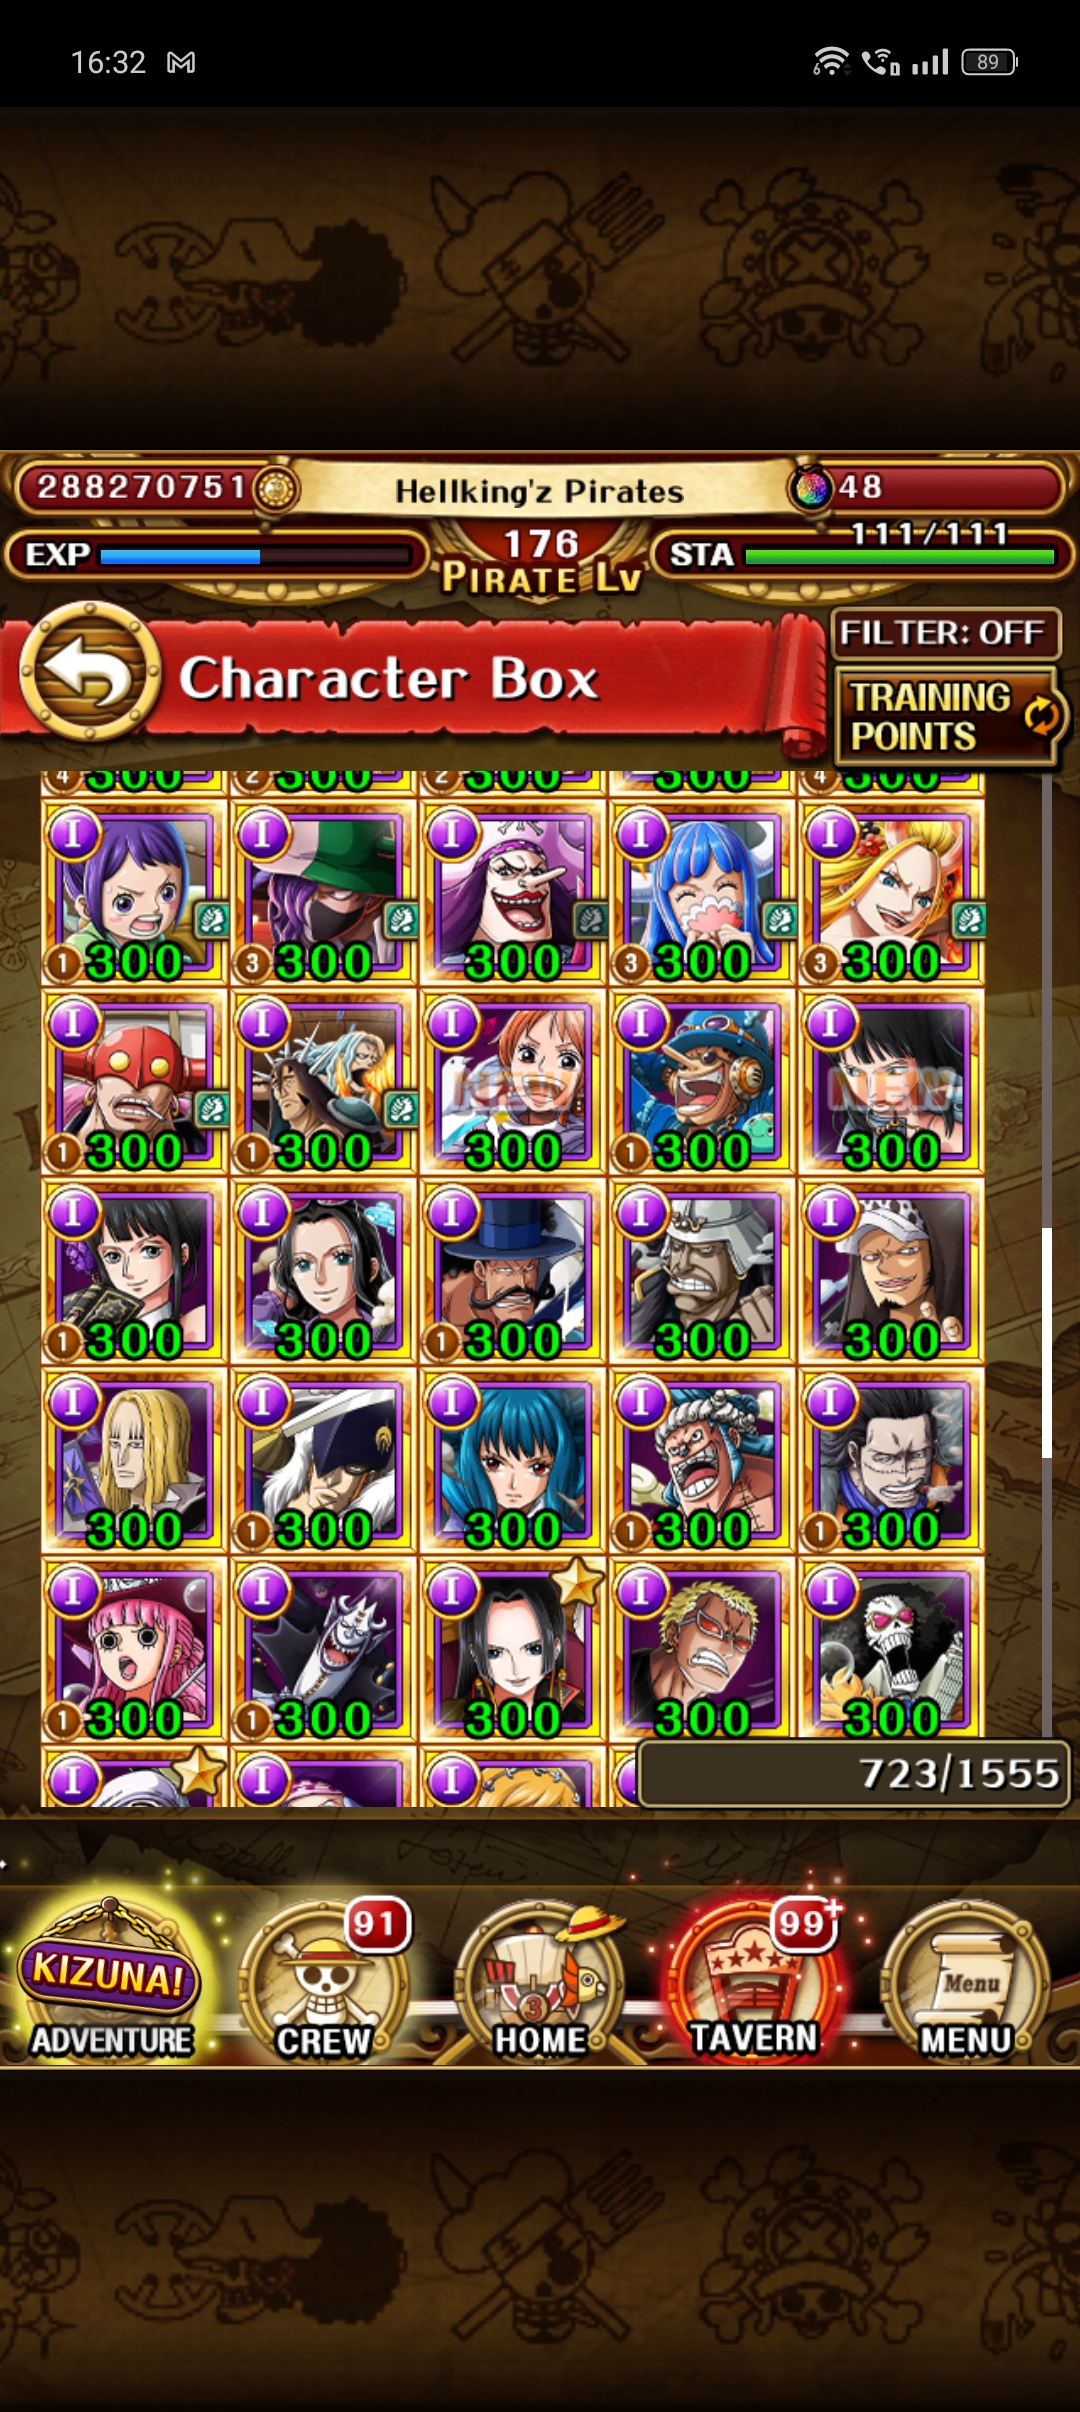 [ANDROID ONLY] GLOBAL - 92 Sugo Rare - Lv176 - 1,2M Bounty - 723 Characters - 48 Gems